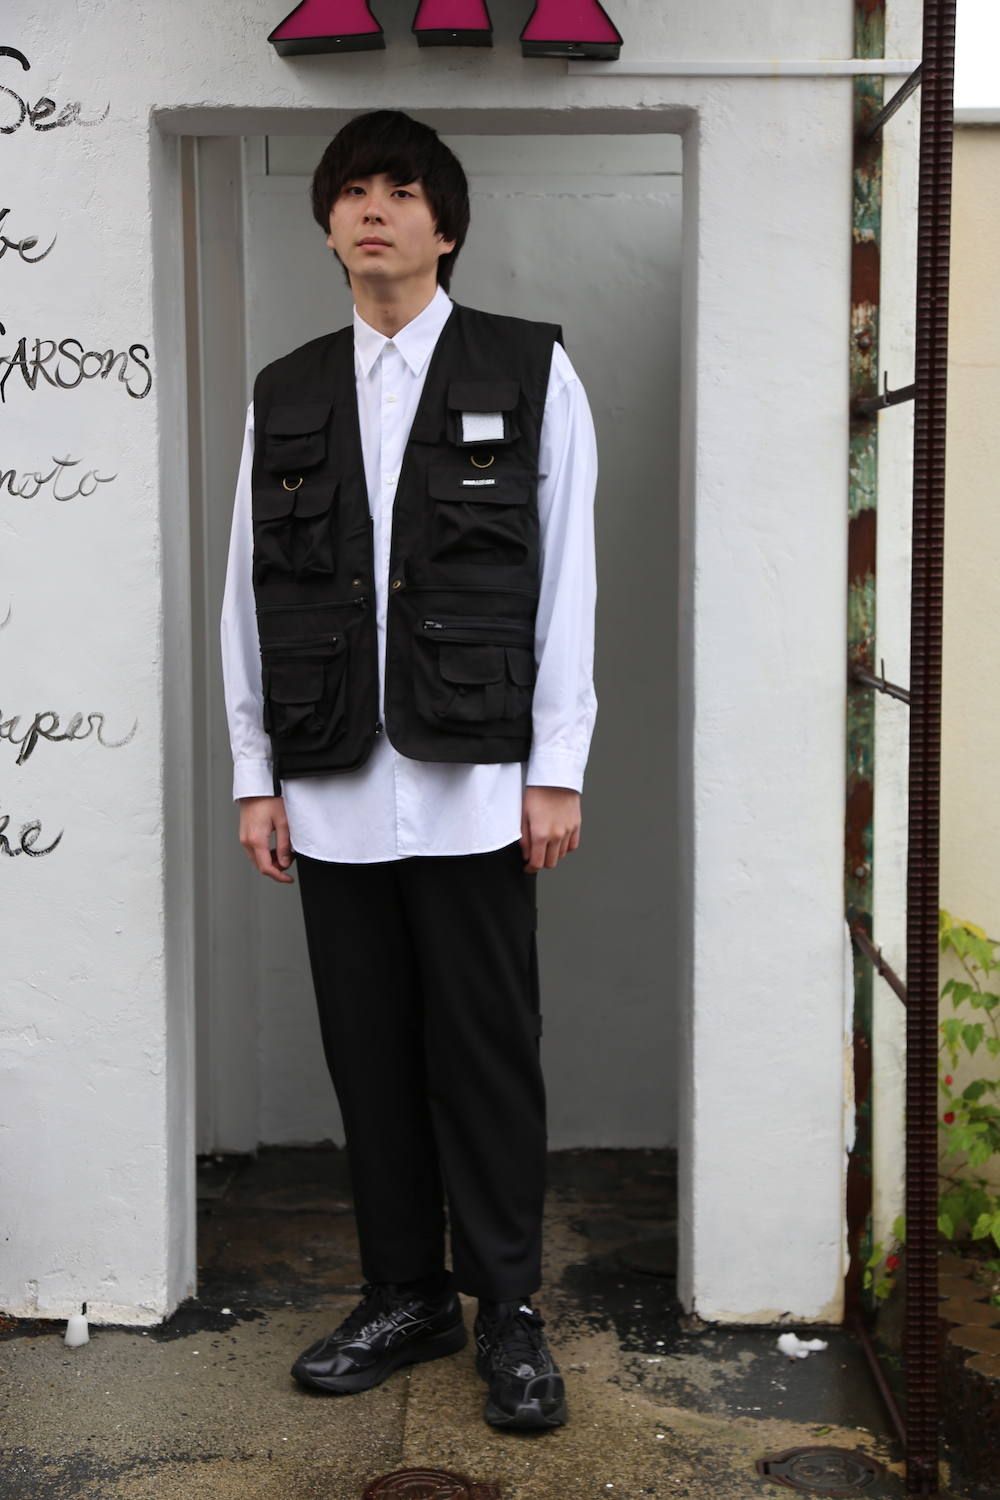 WIND AND SEA 「UTILITY VEST」style.2020.2.29. | 833 | mark